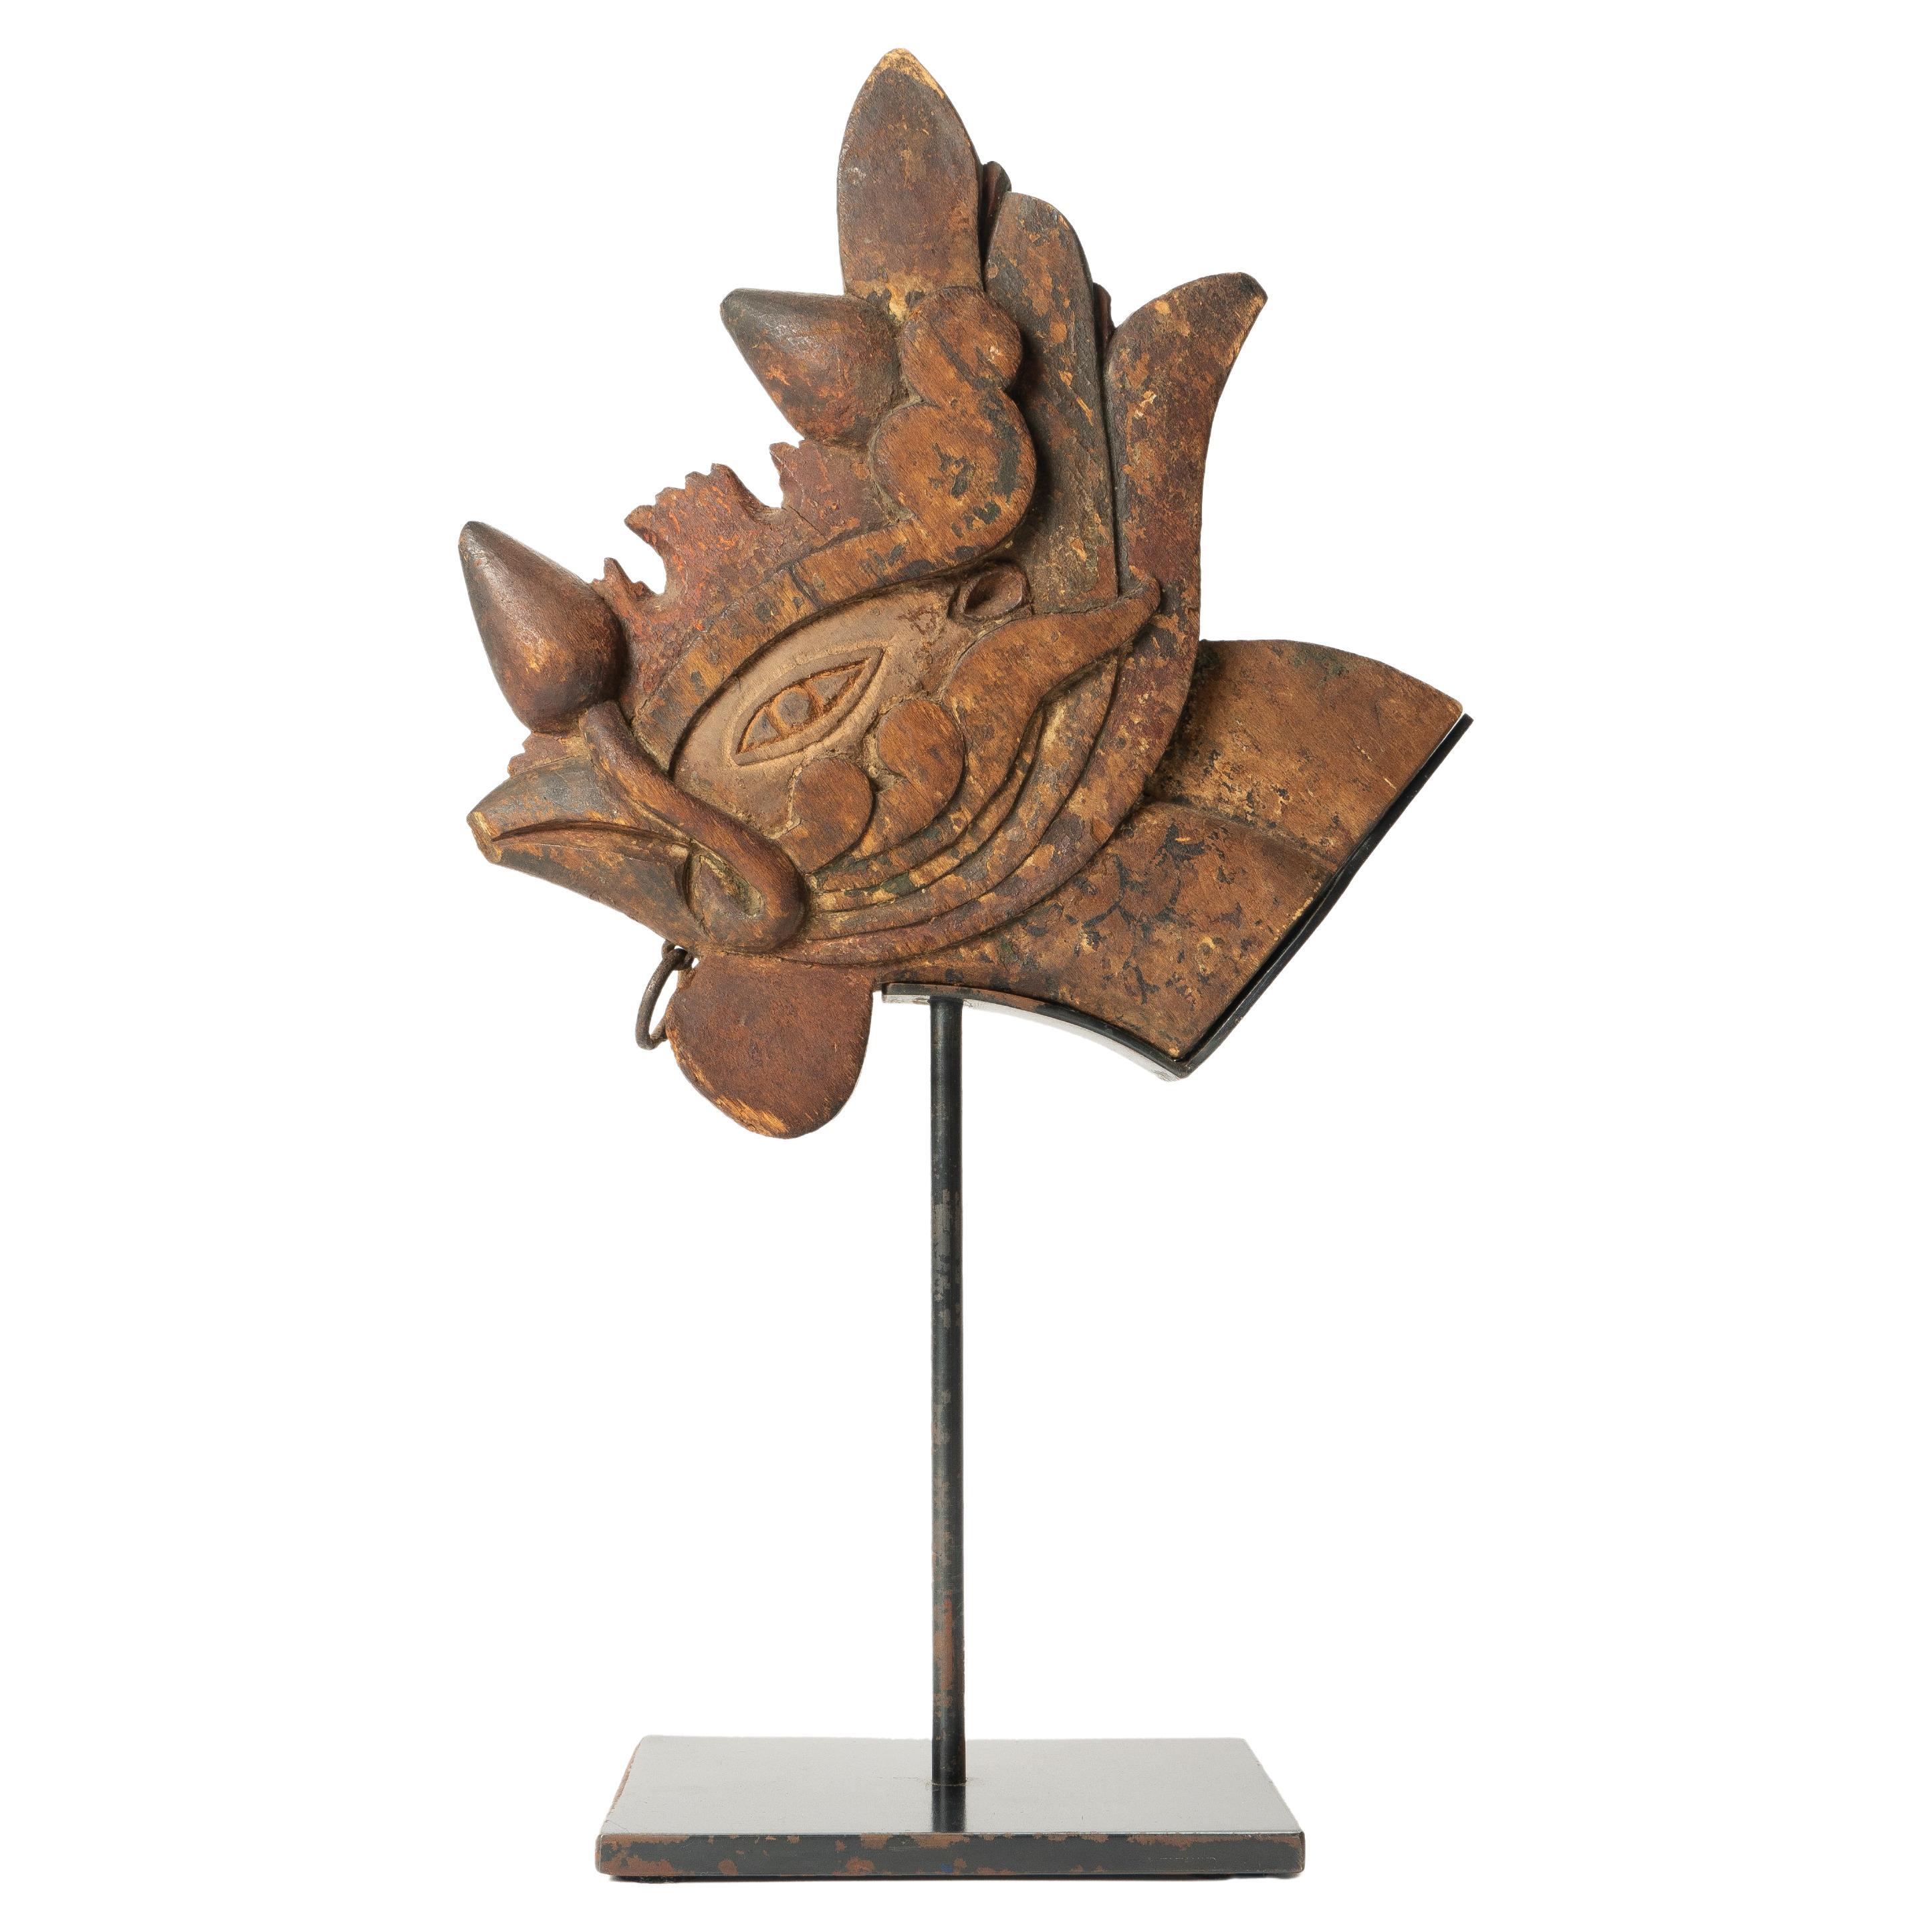 Spanish Colonial Era Architectural Wood Carving of a Rooster Head